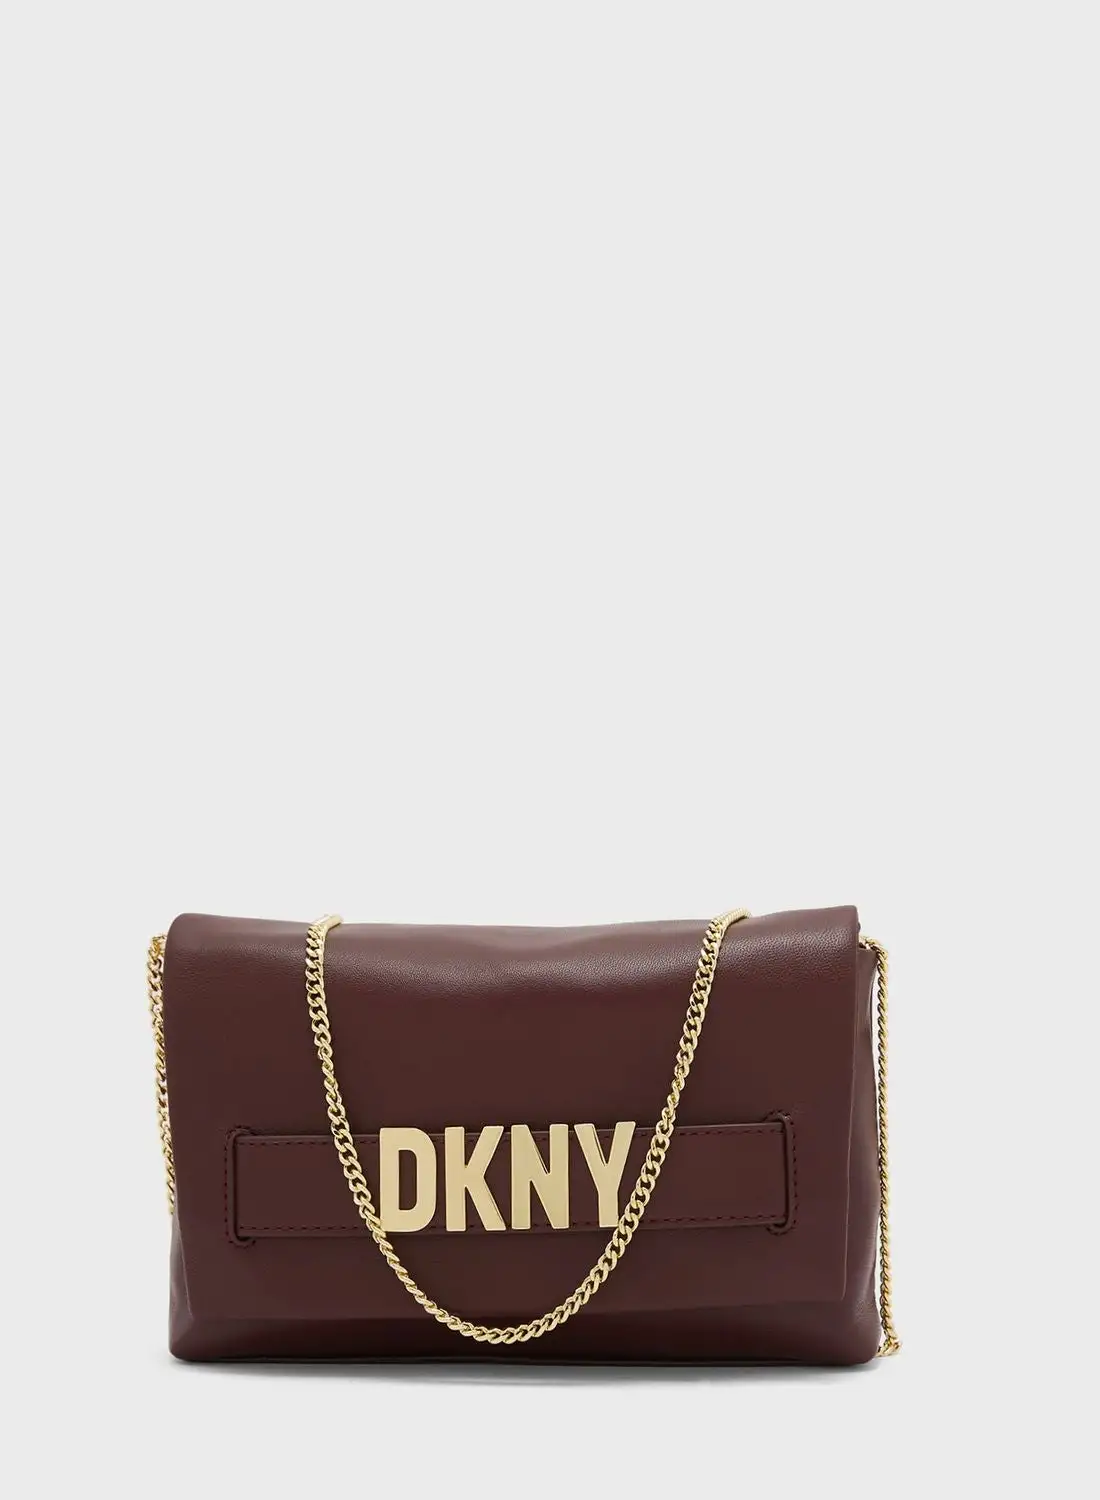 DKNY Pilar Flap Over Clutches Bags